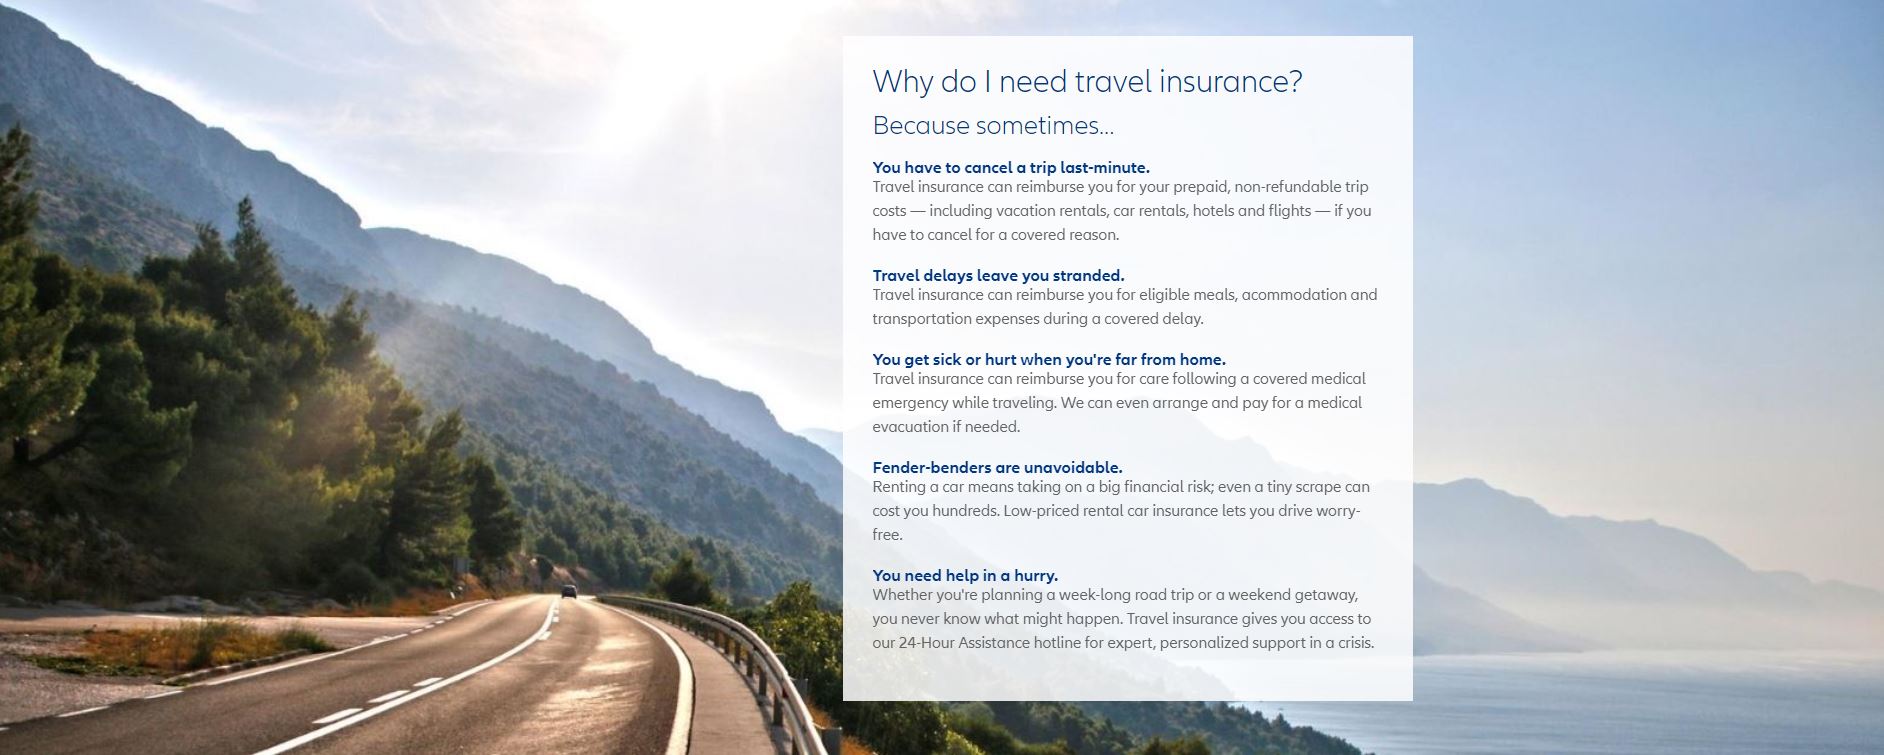 Advise why to take travel insurance